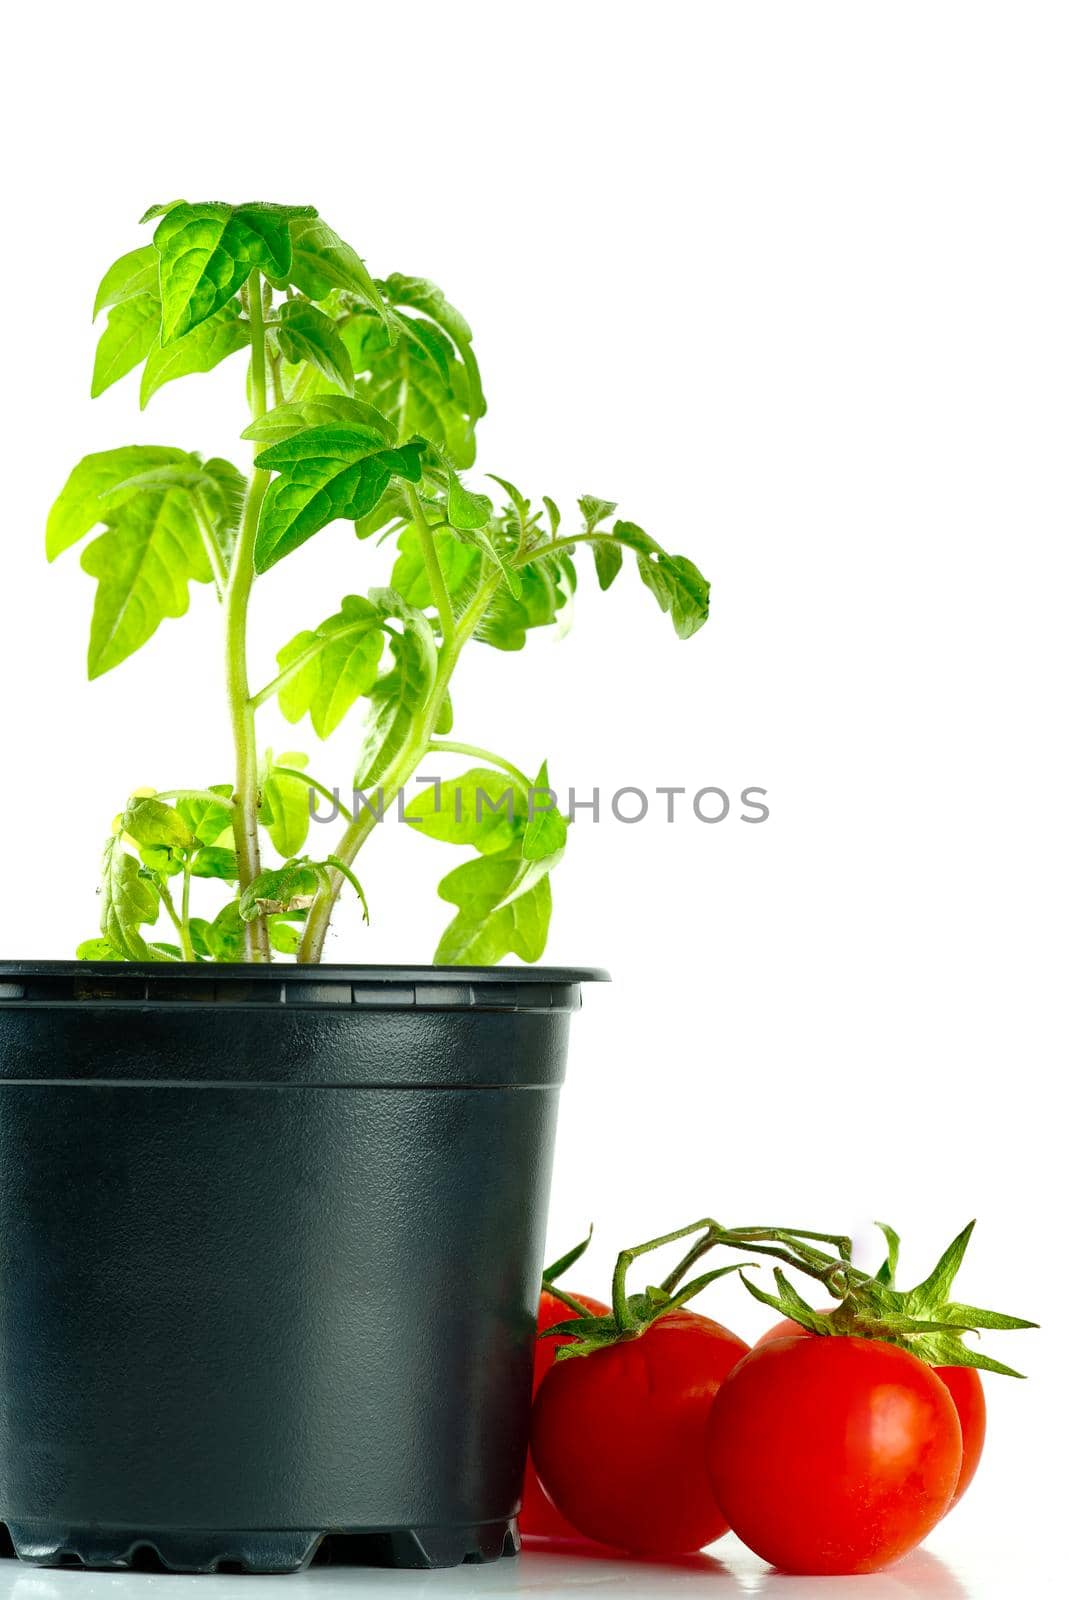 Green tomato seedling sprouts in black pot isolated on white background Spring concept for gardening by PhotoTime